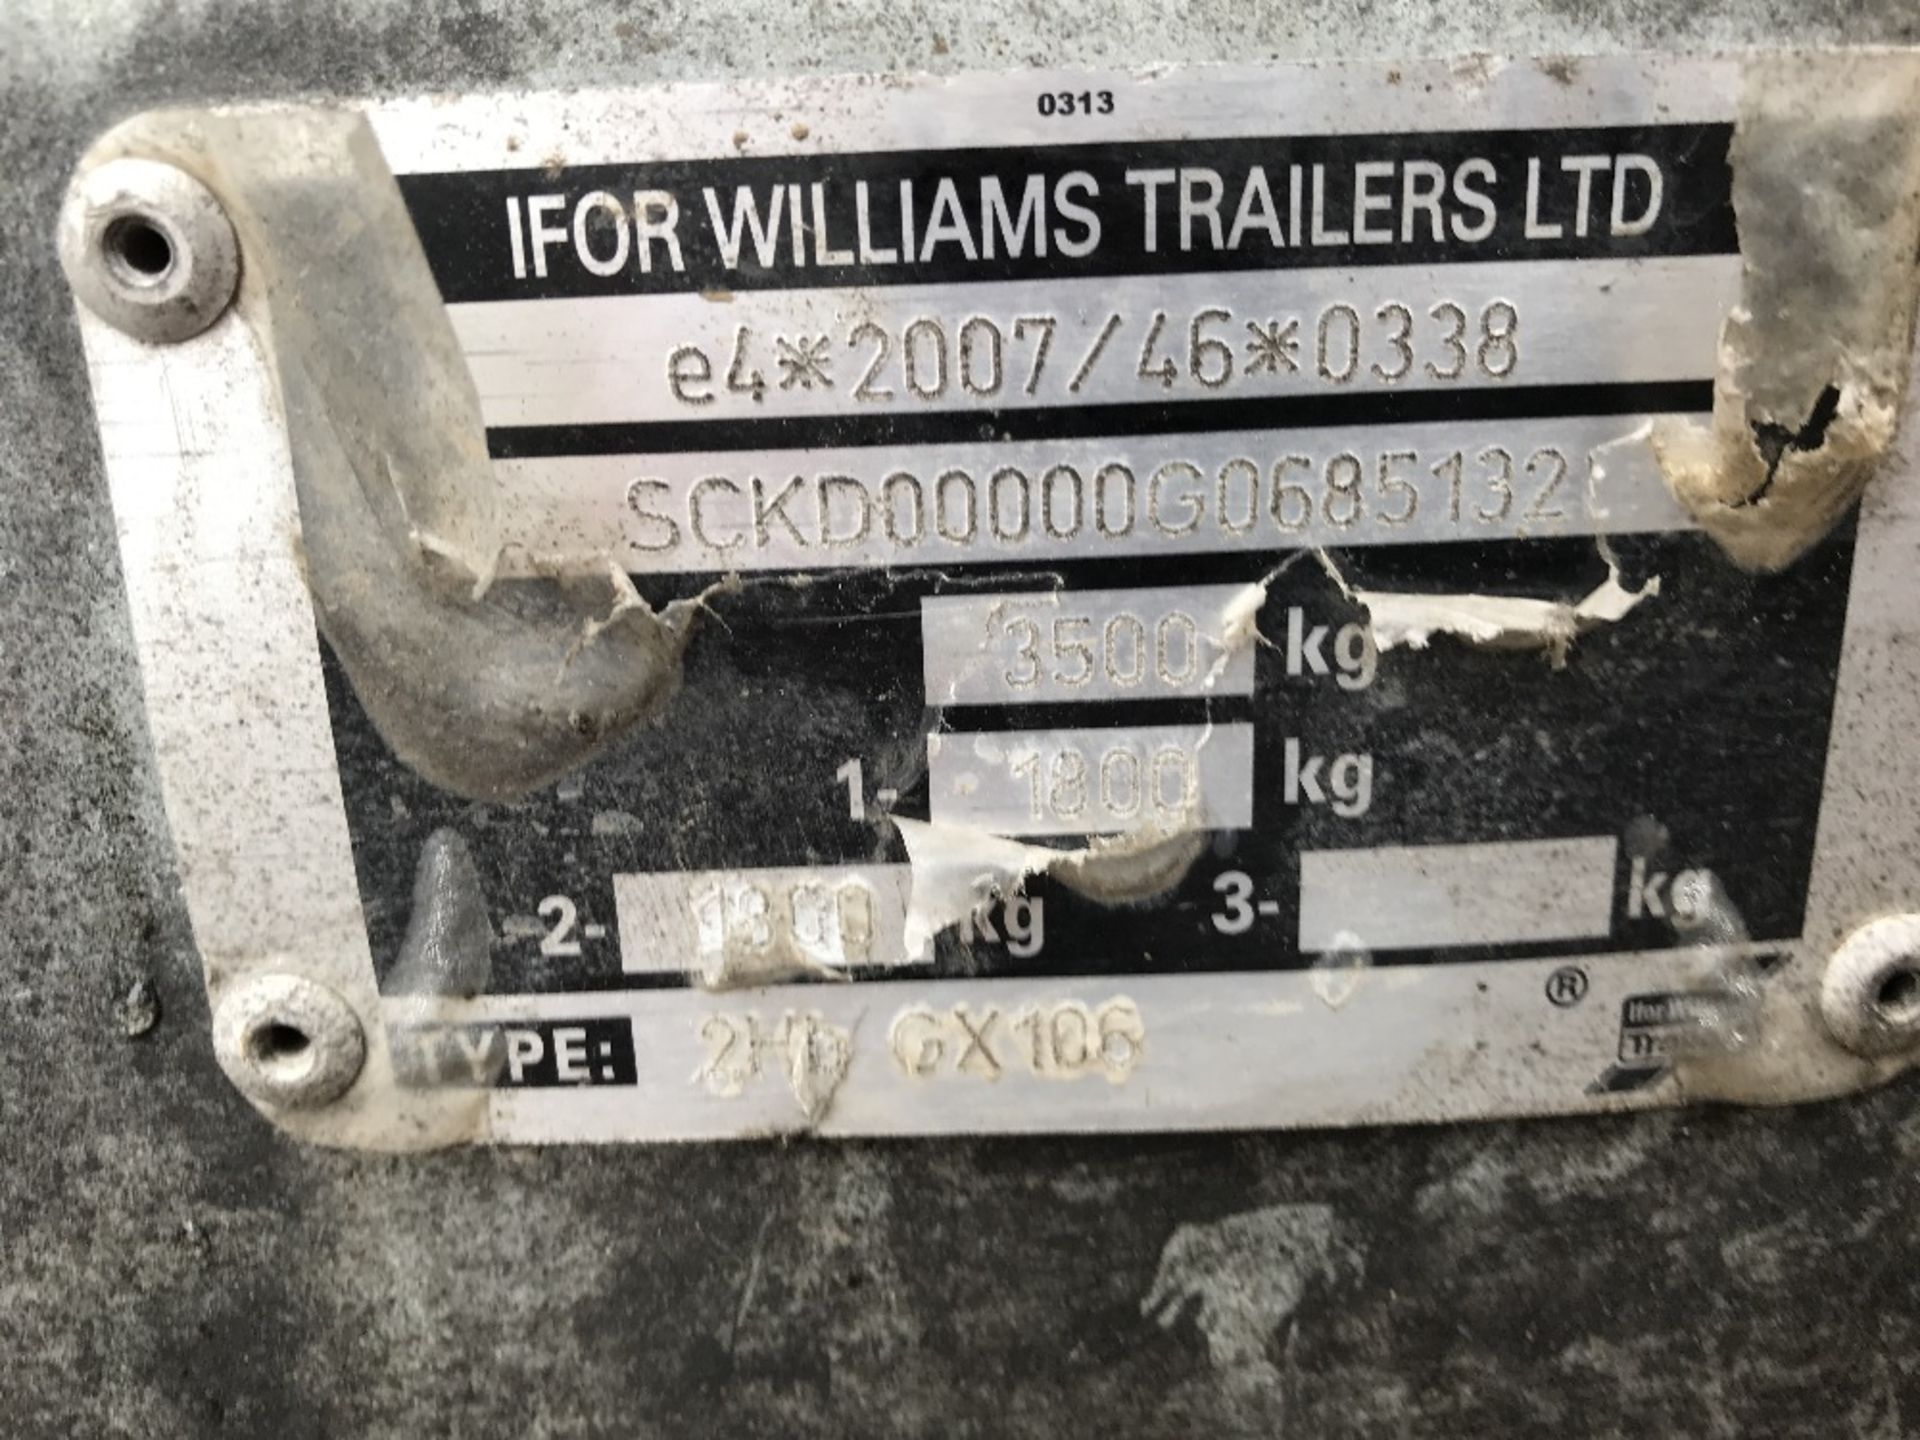 Ifor Williams wide bodied plant trailer, yr2016 approx. SN;SCKD00000G0685132 - Image 3 of 6